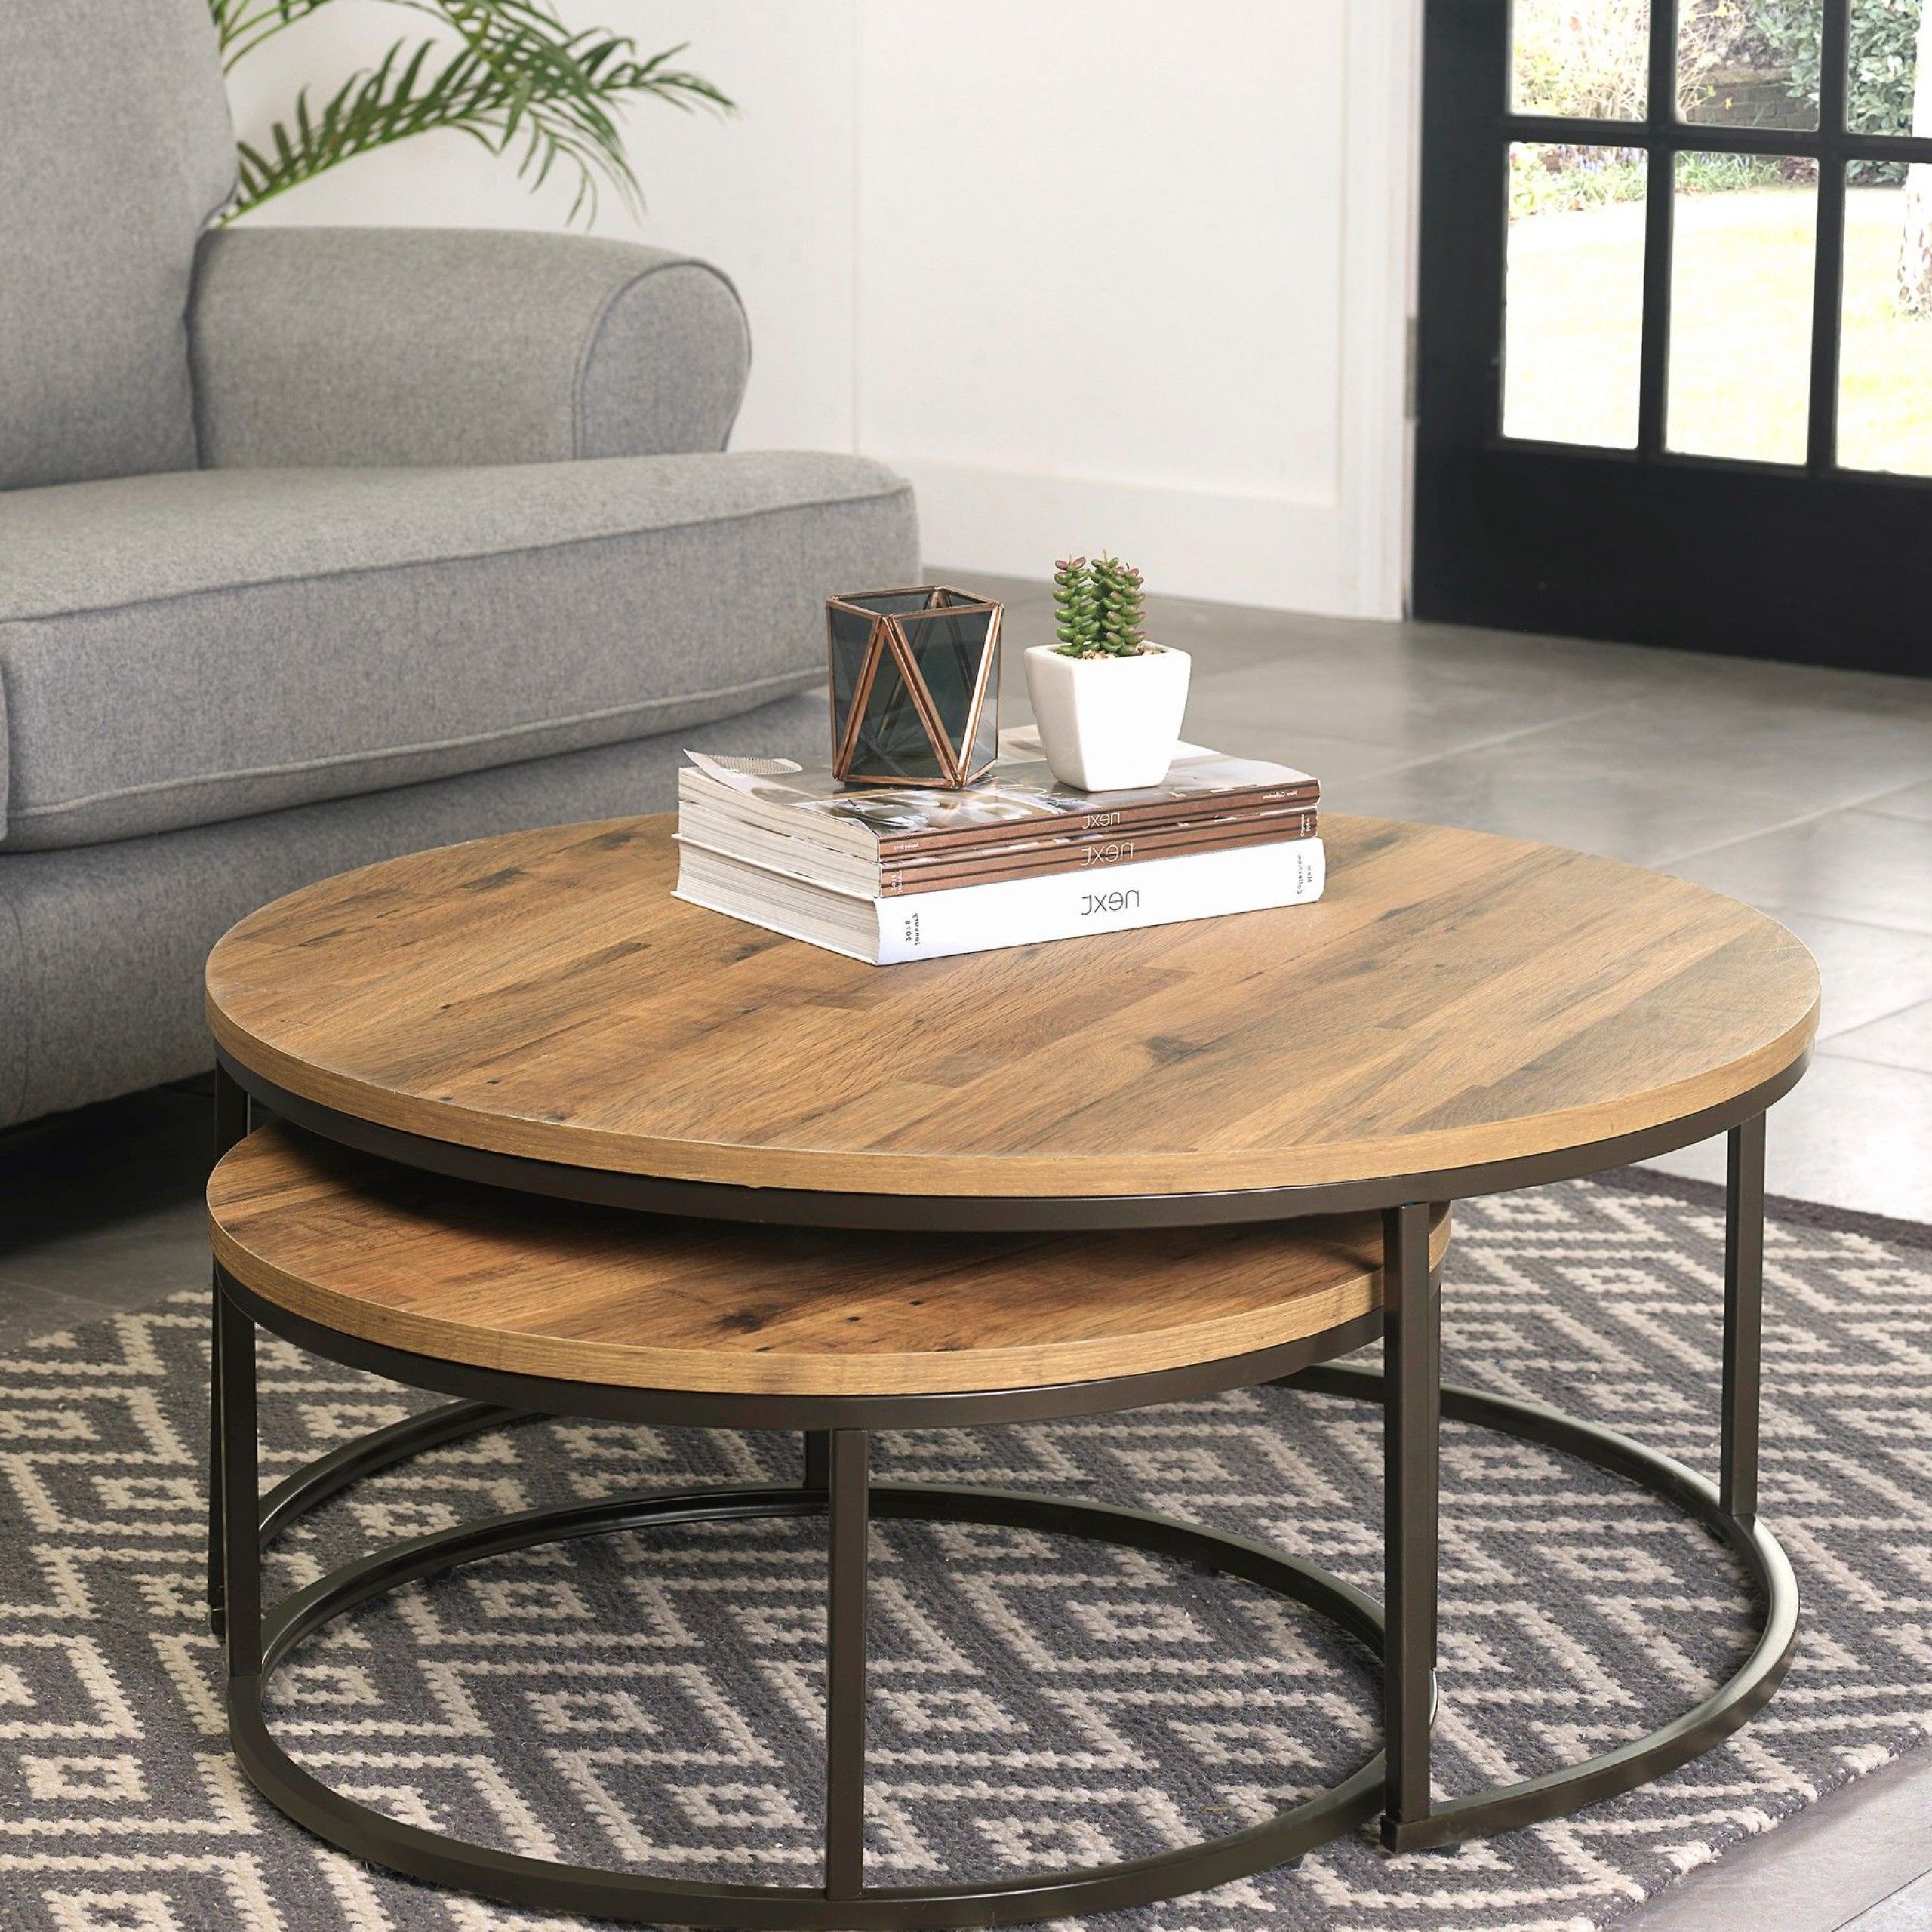 Most Recently Released Metal Legs And Oak Top Round Coffee Tables In Buy Bronx Round Coffee Nest Of Tables From The Next Uk Online Shop (View 3 of 10)